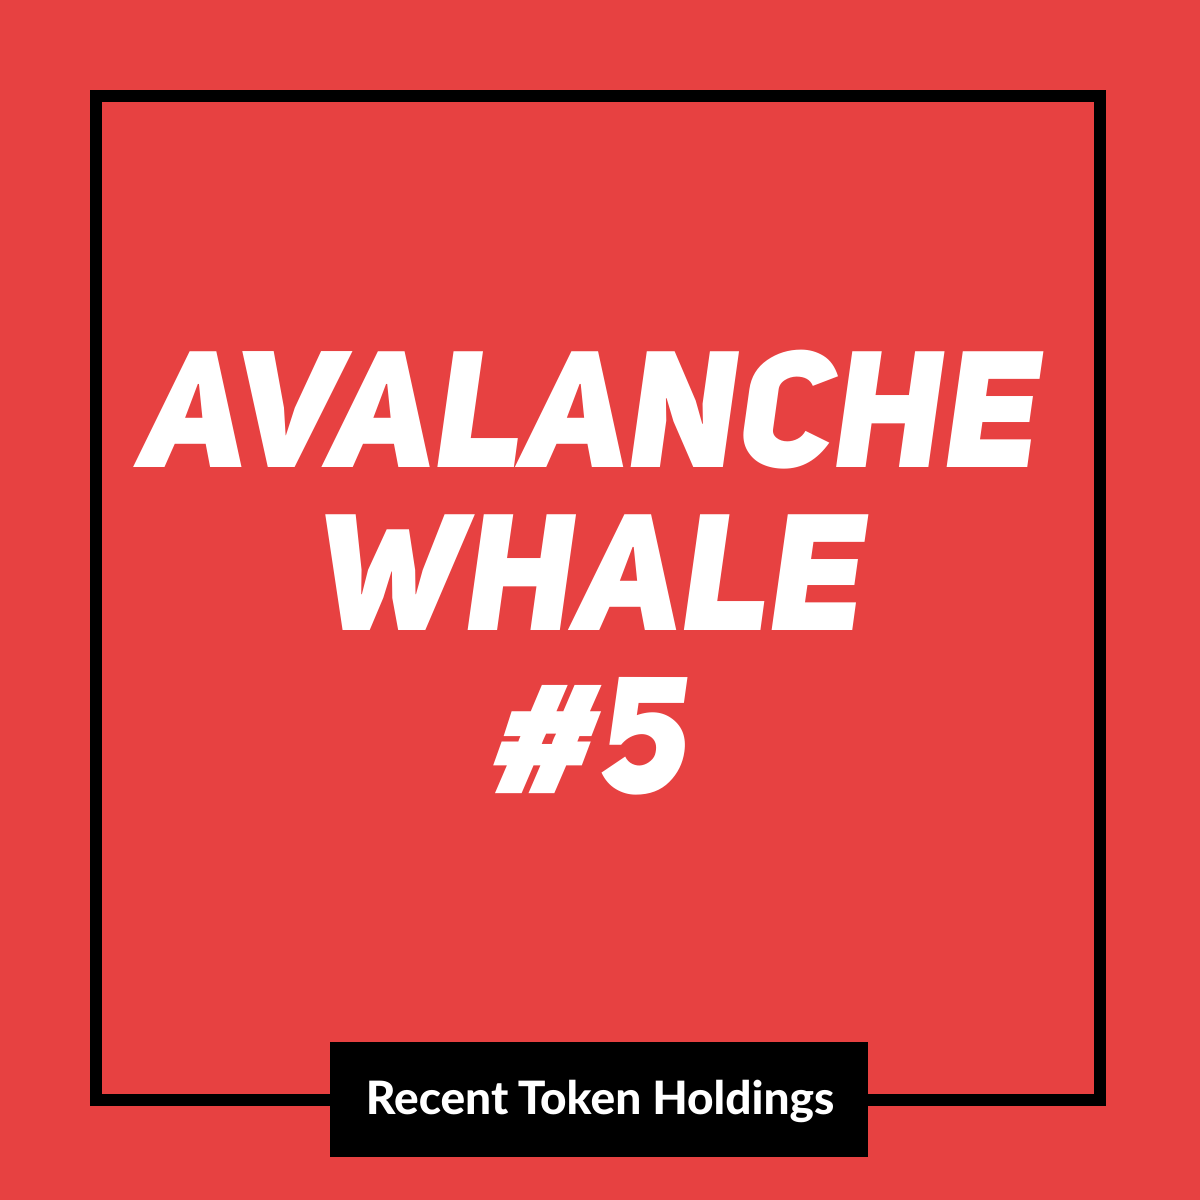 Avalanche Whale #5